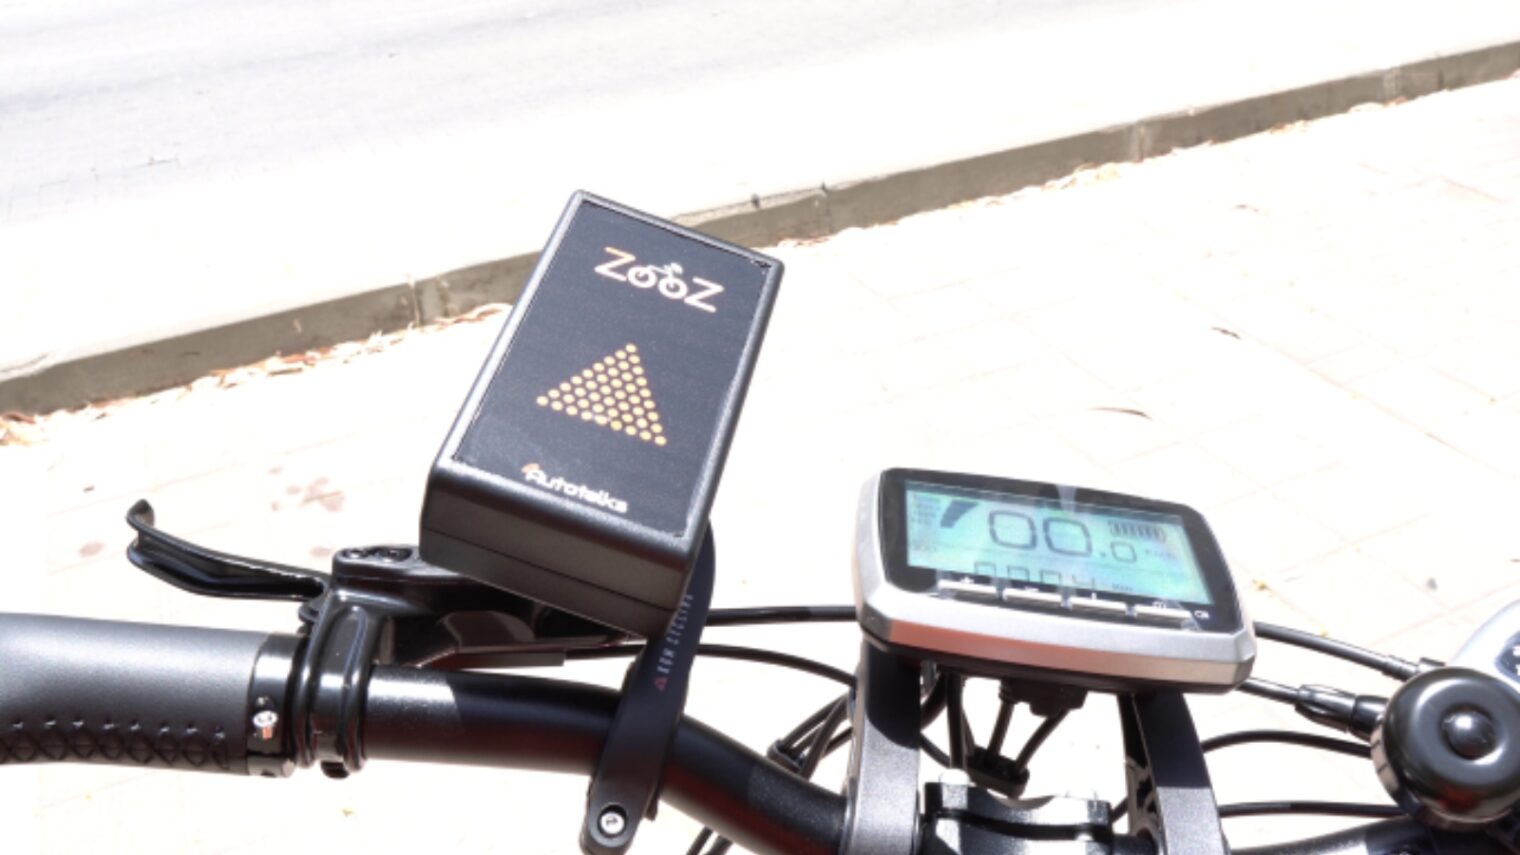 The ZooZ device fitted to bicycle handlebars. Photo courtesy of Autotalks